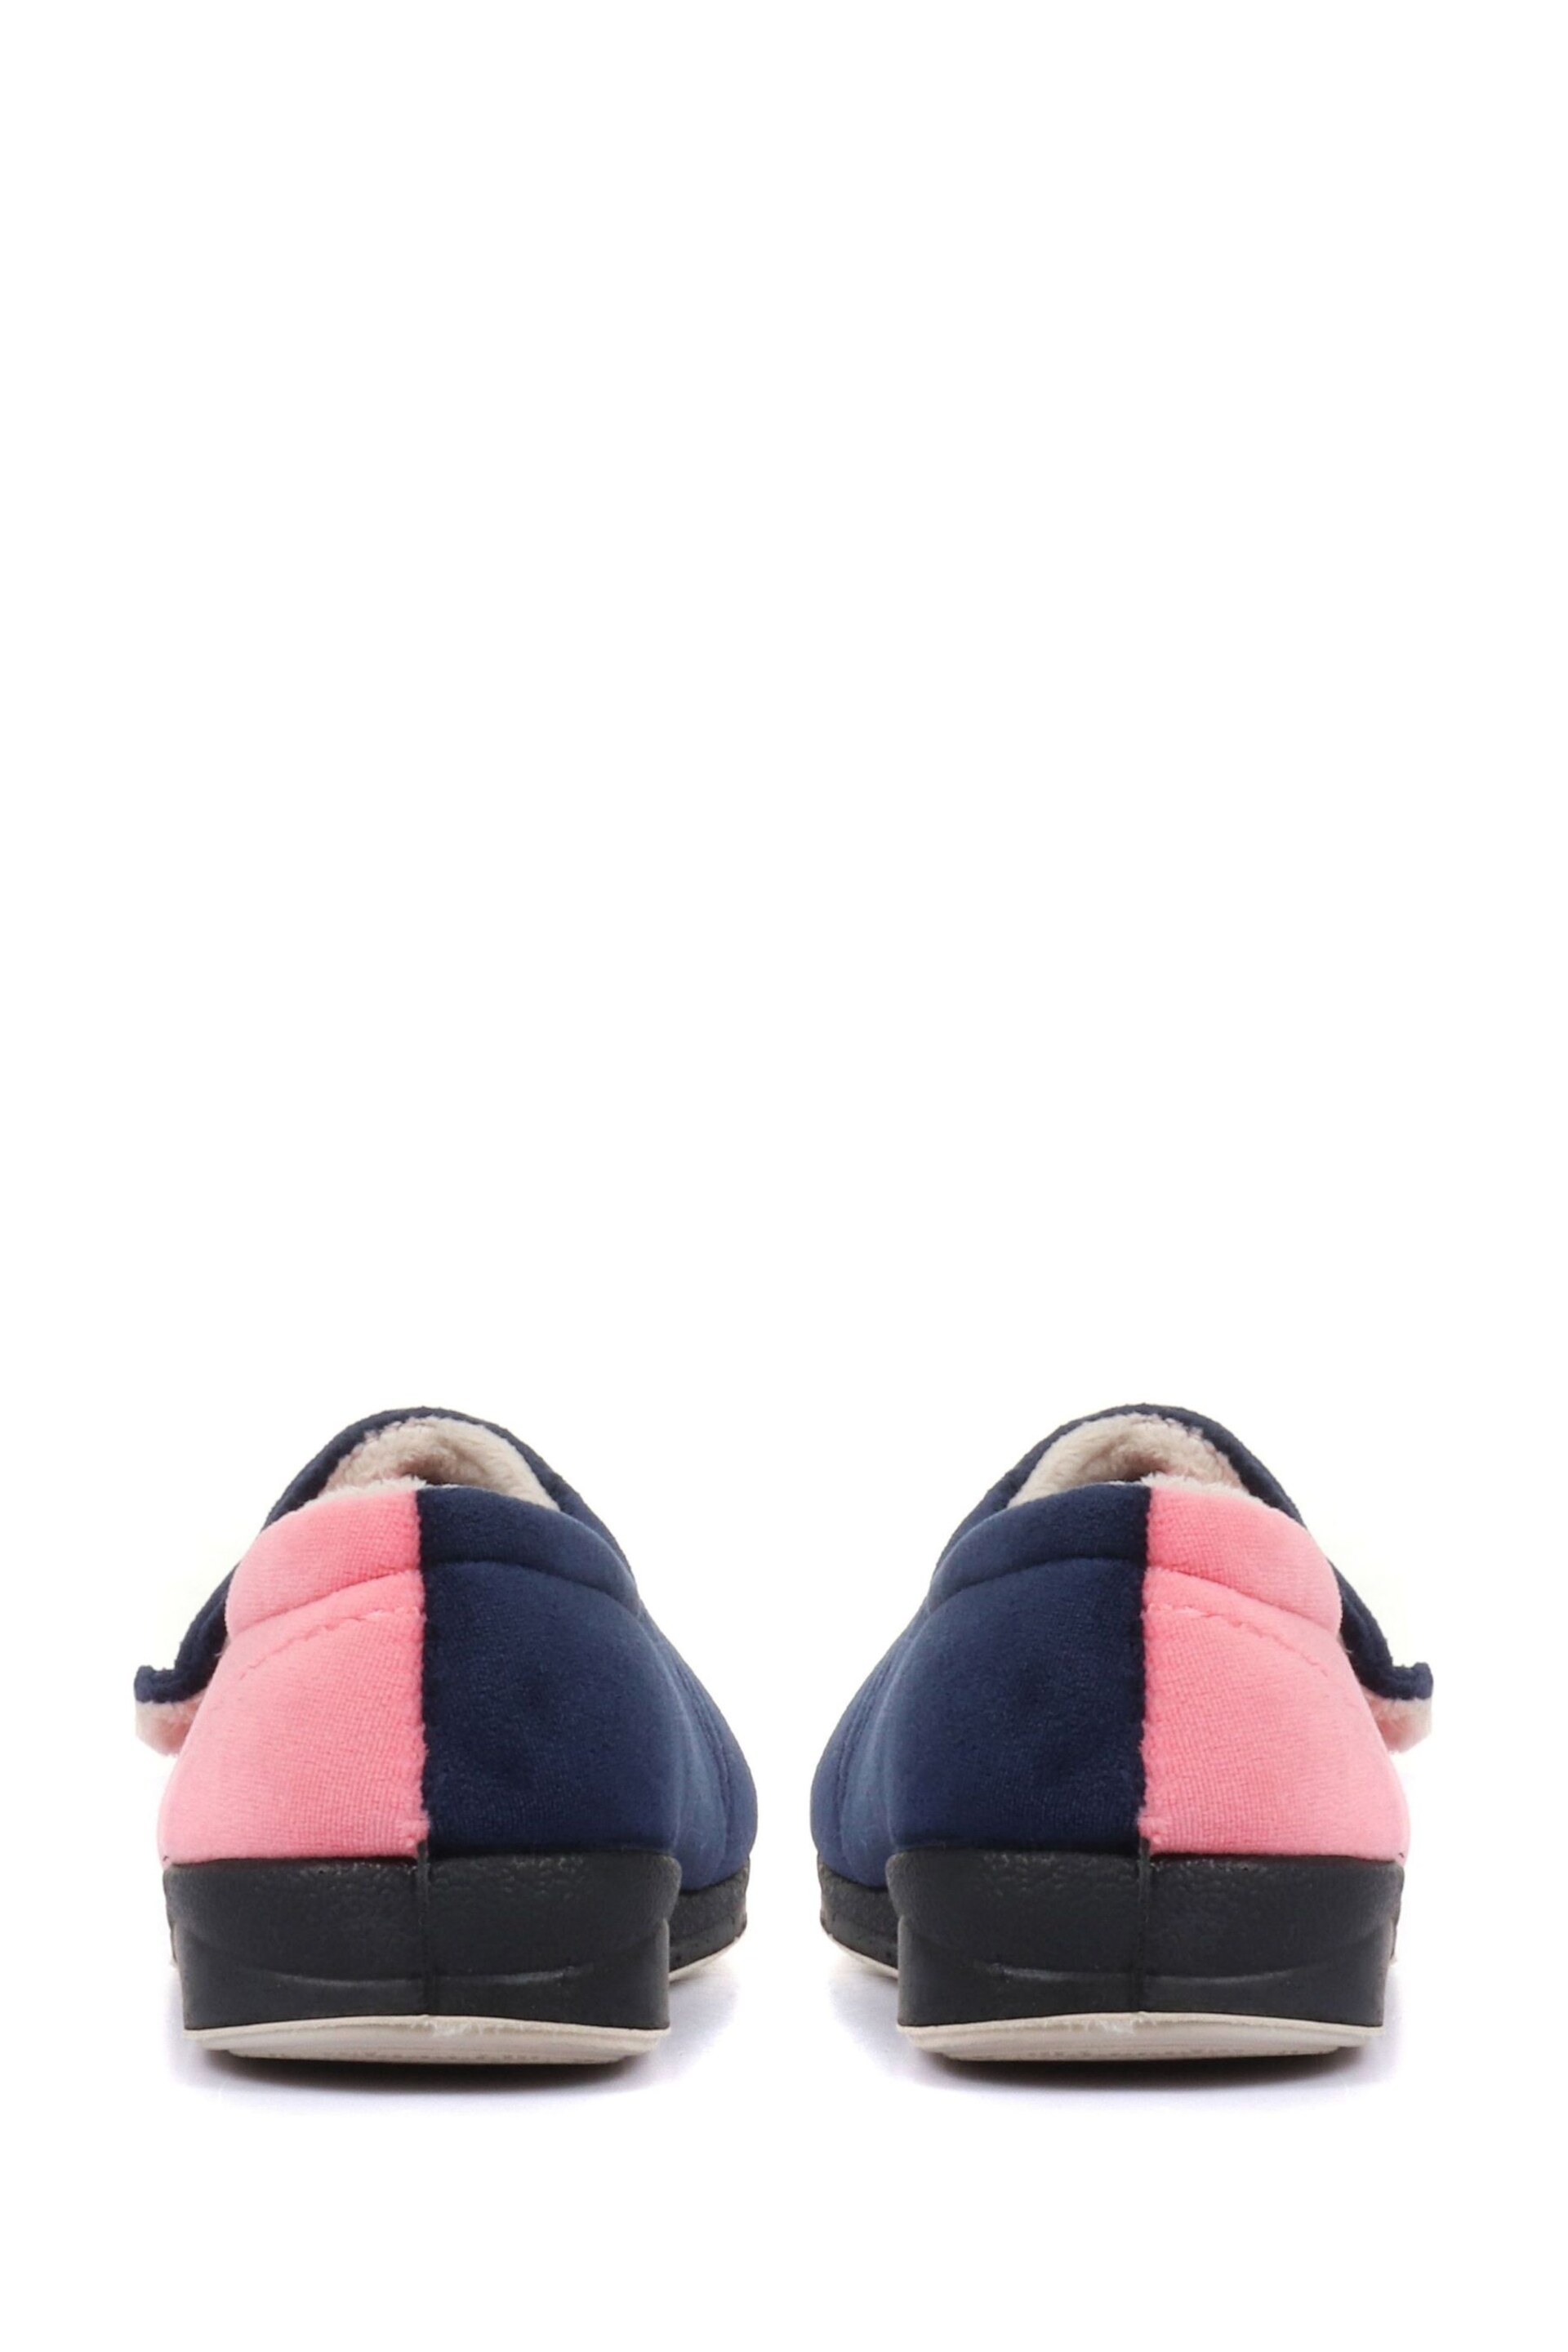 Pavers Pink Ladies Touch Fasten Full Slippers With Permalose Sole - Image 3 of 5